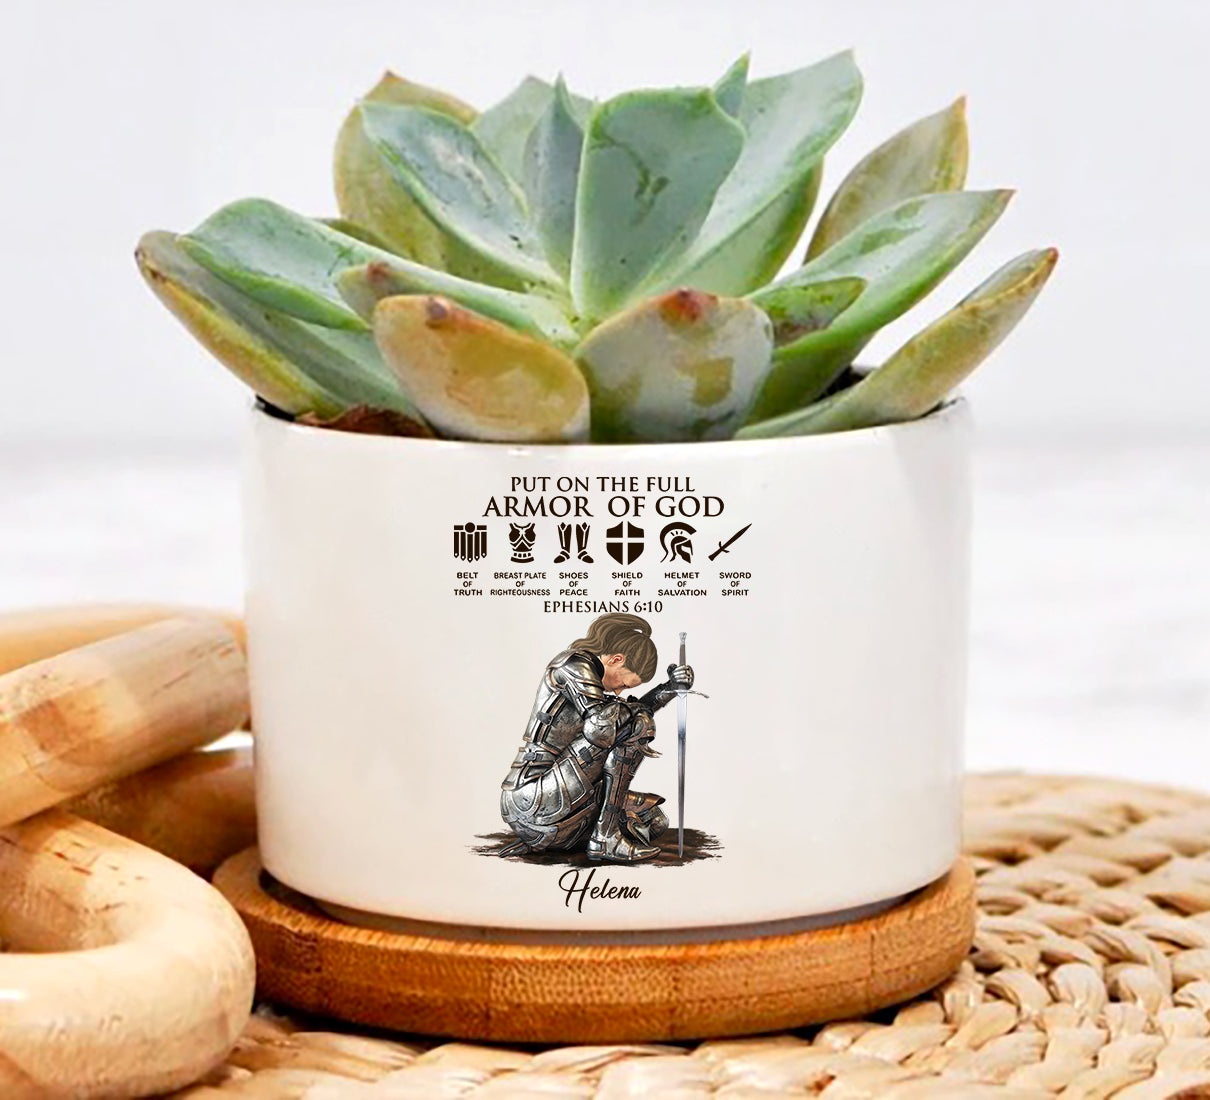 Personalized Woman Warrior Of God of God Put On The Full Armor of God Ephesians 6-10 Plant Pot